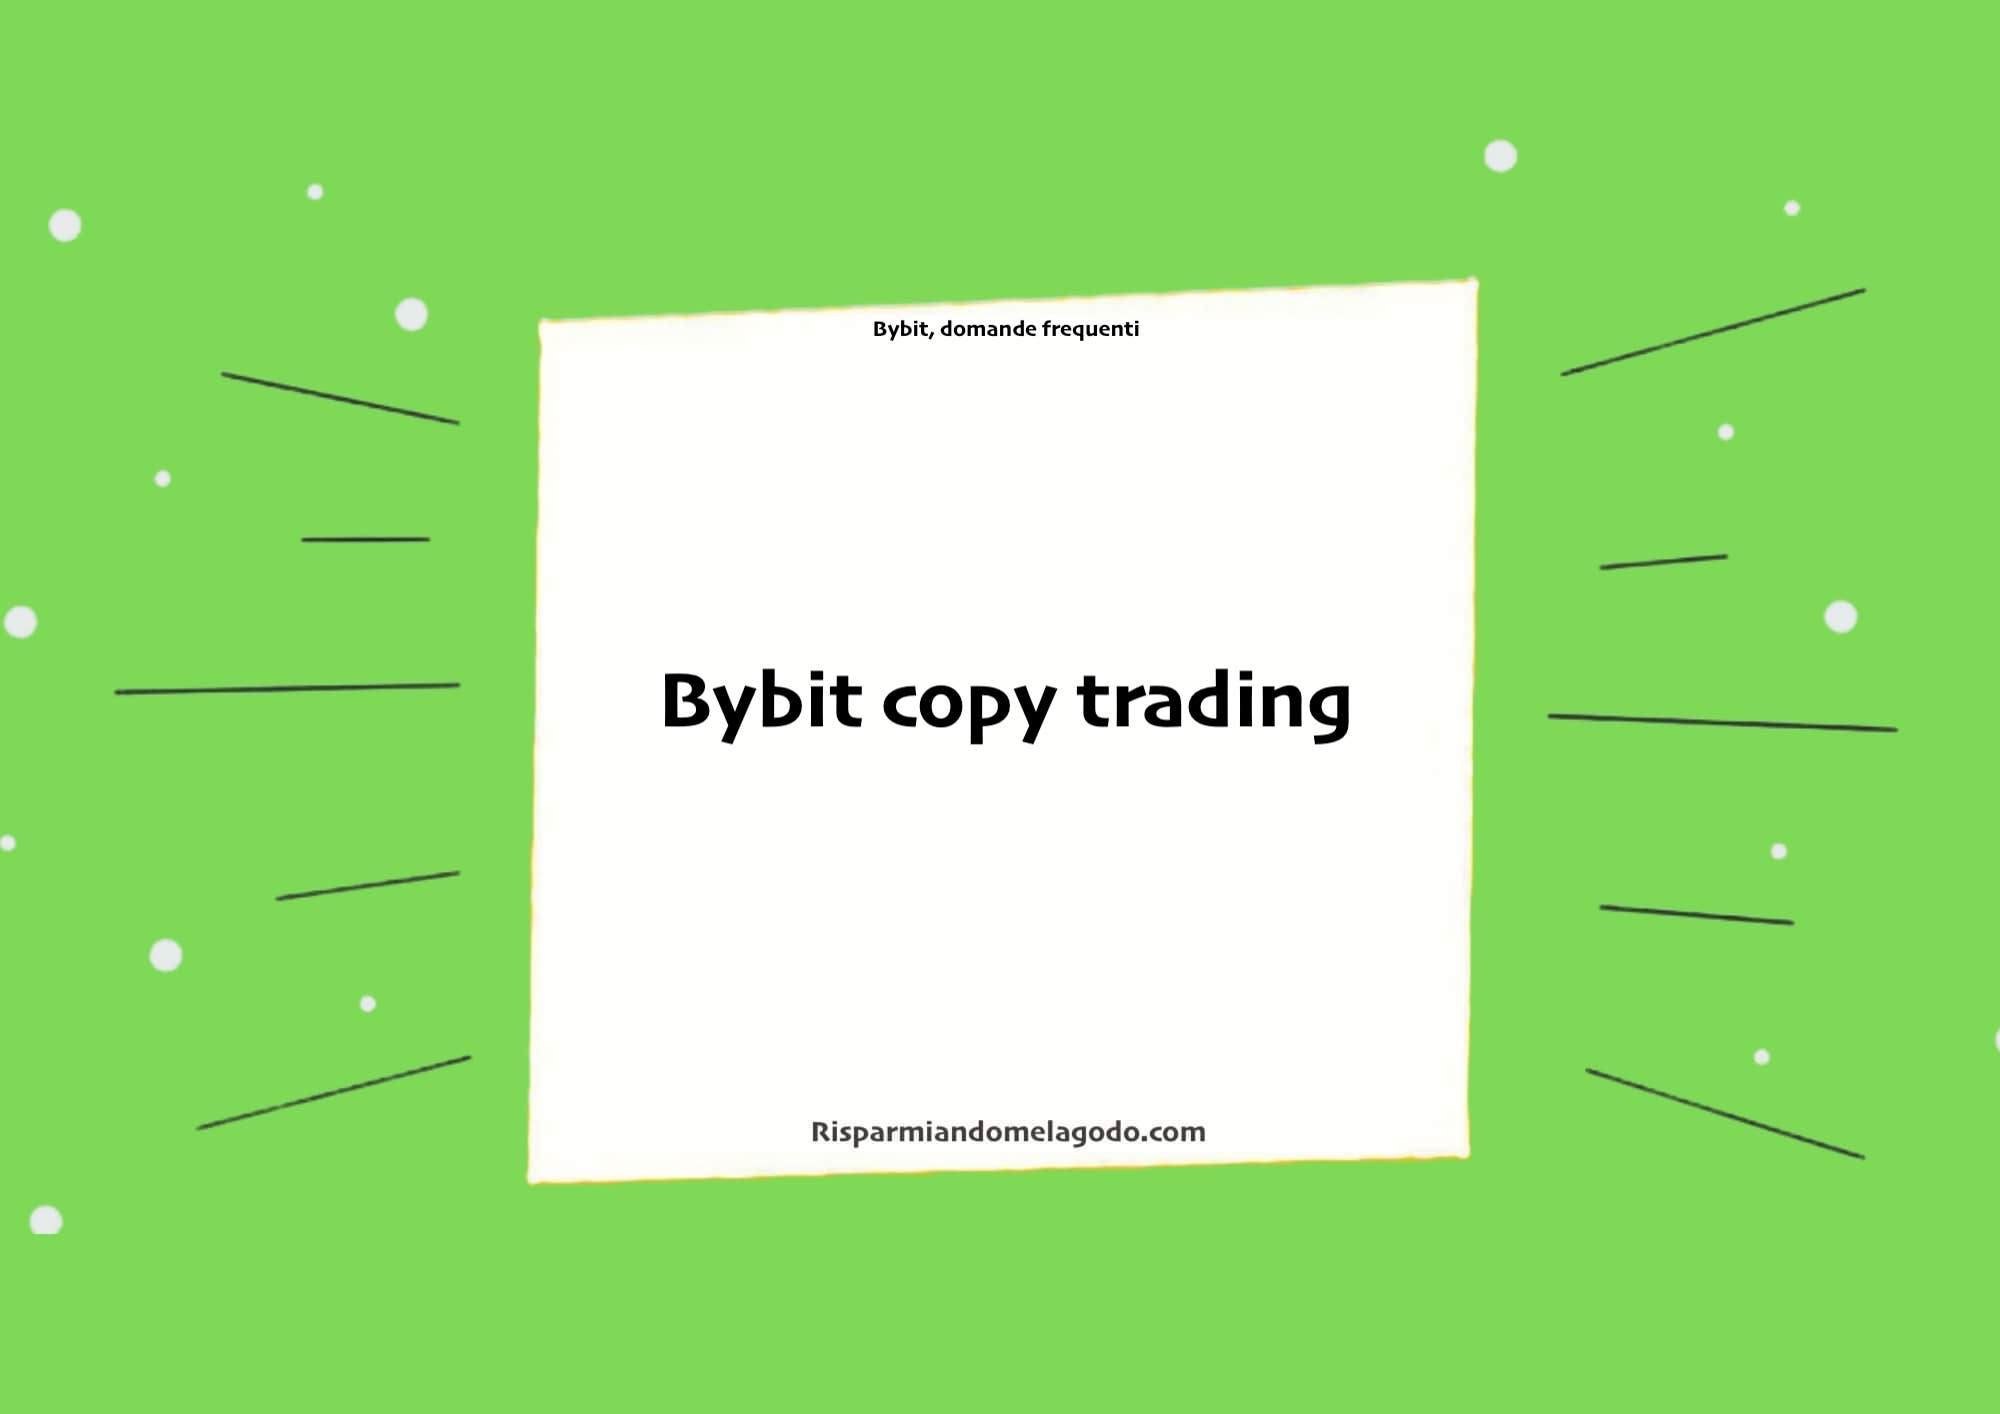 Bybit copy trading